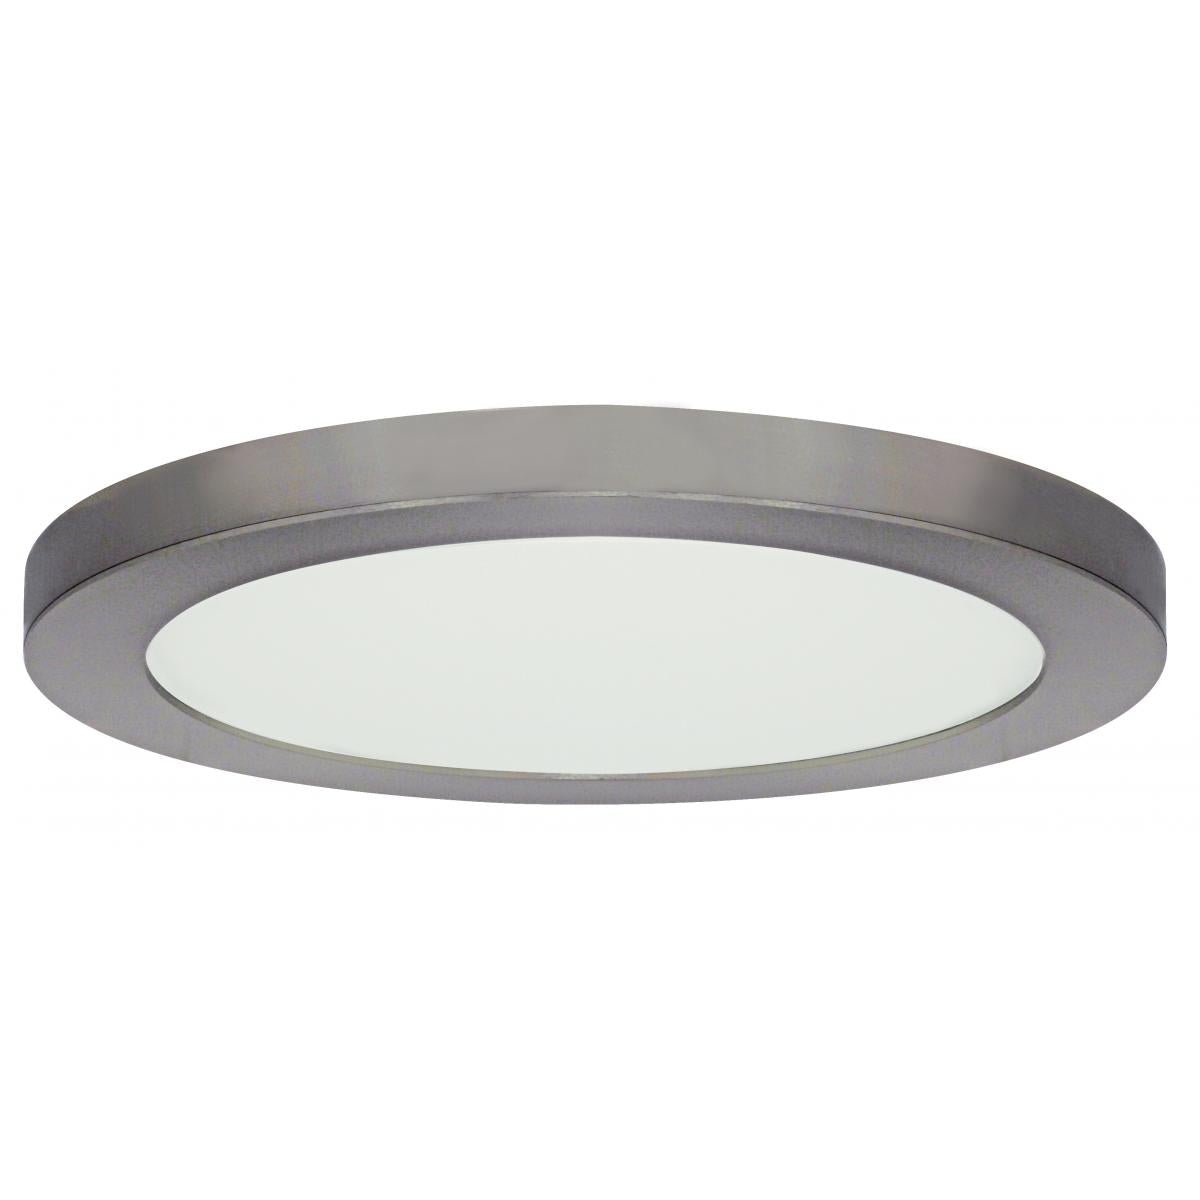 SATCO-S29651SATCO S29650 25W 13" Round LED Surface Mount 30K